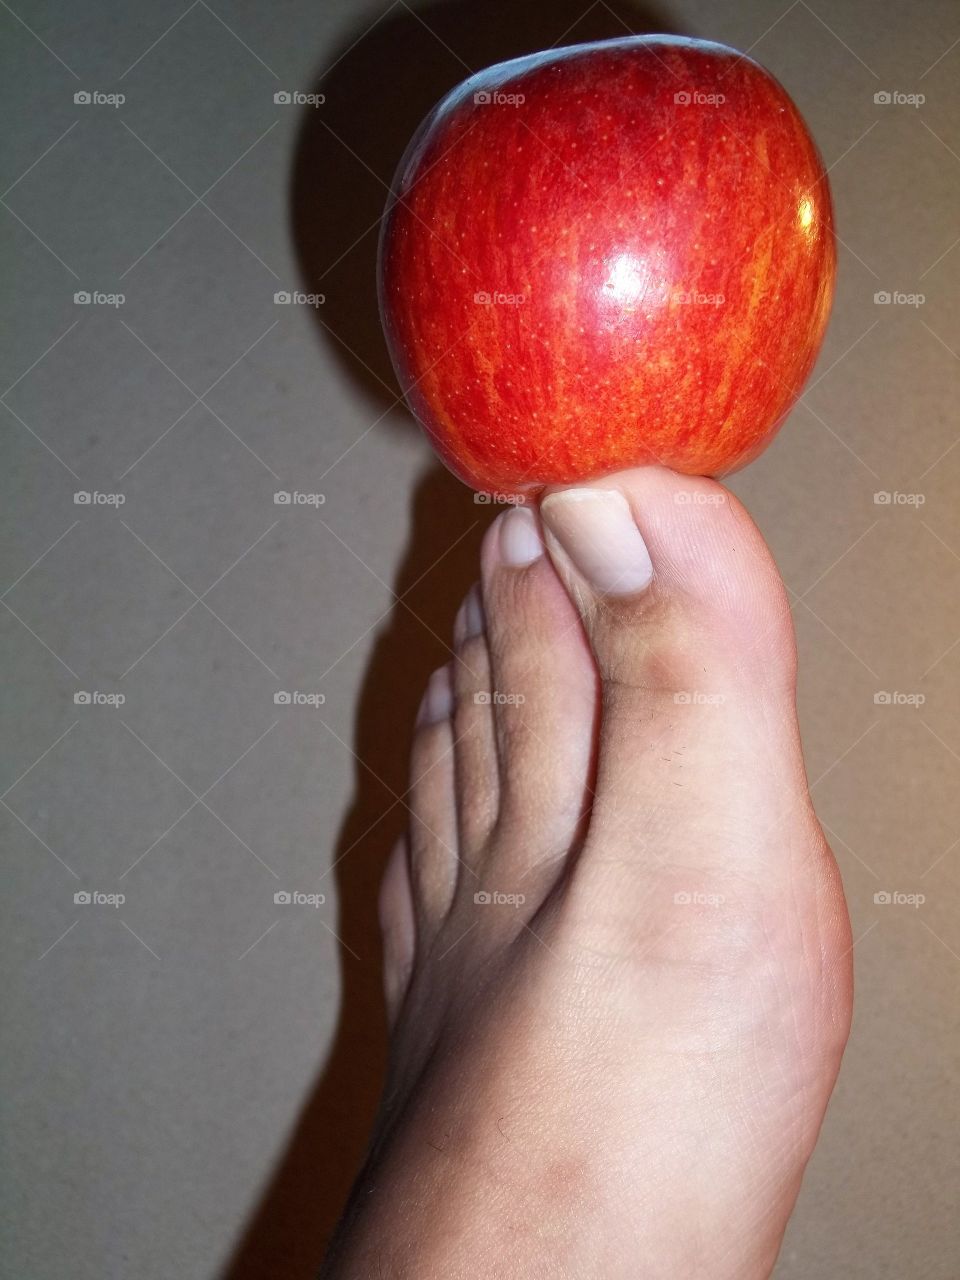 Red Apple Balanced on my toes